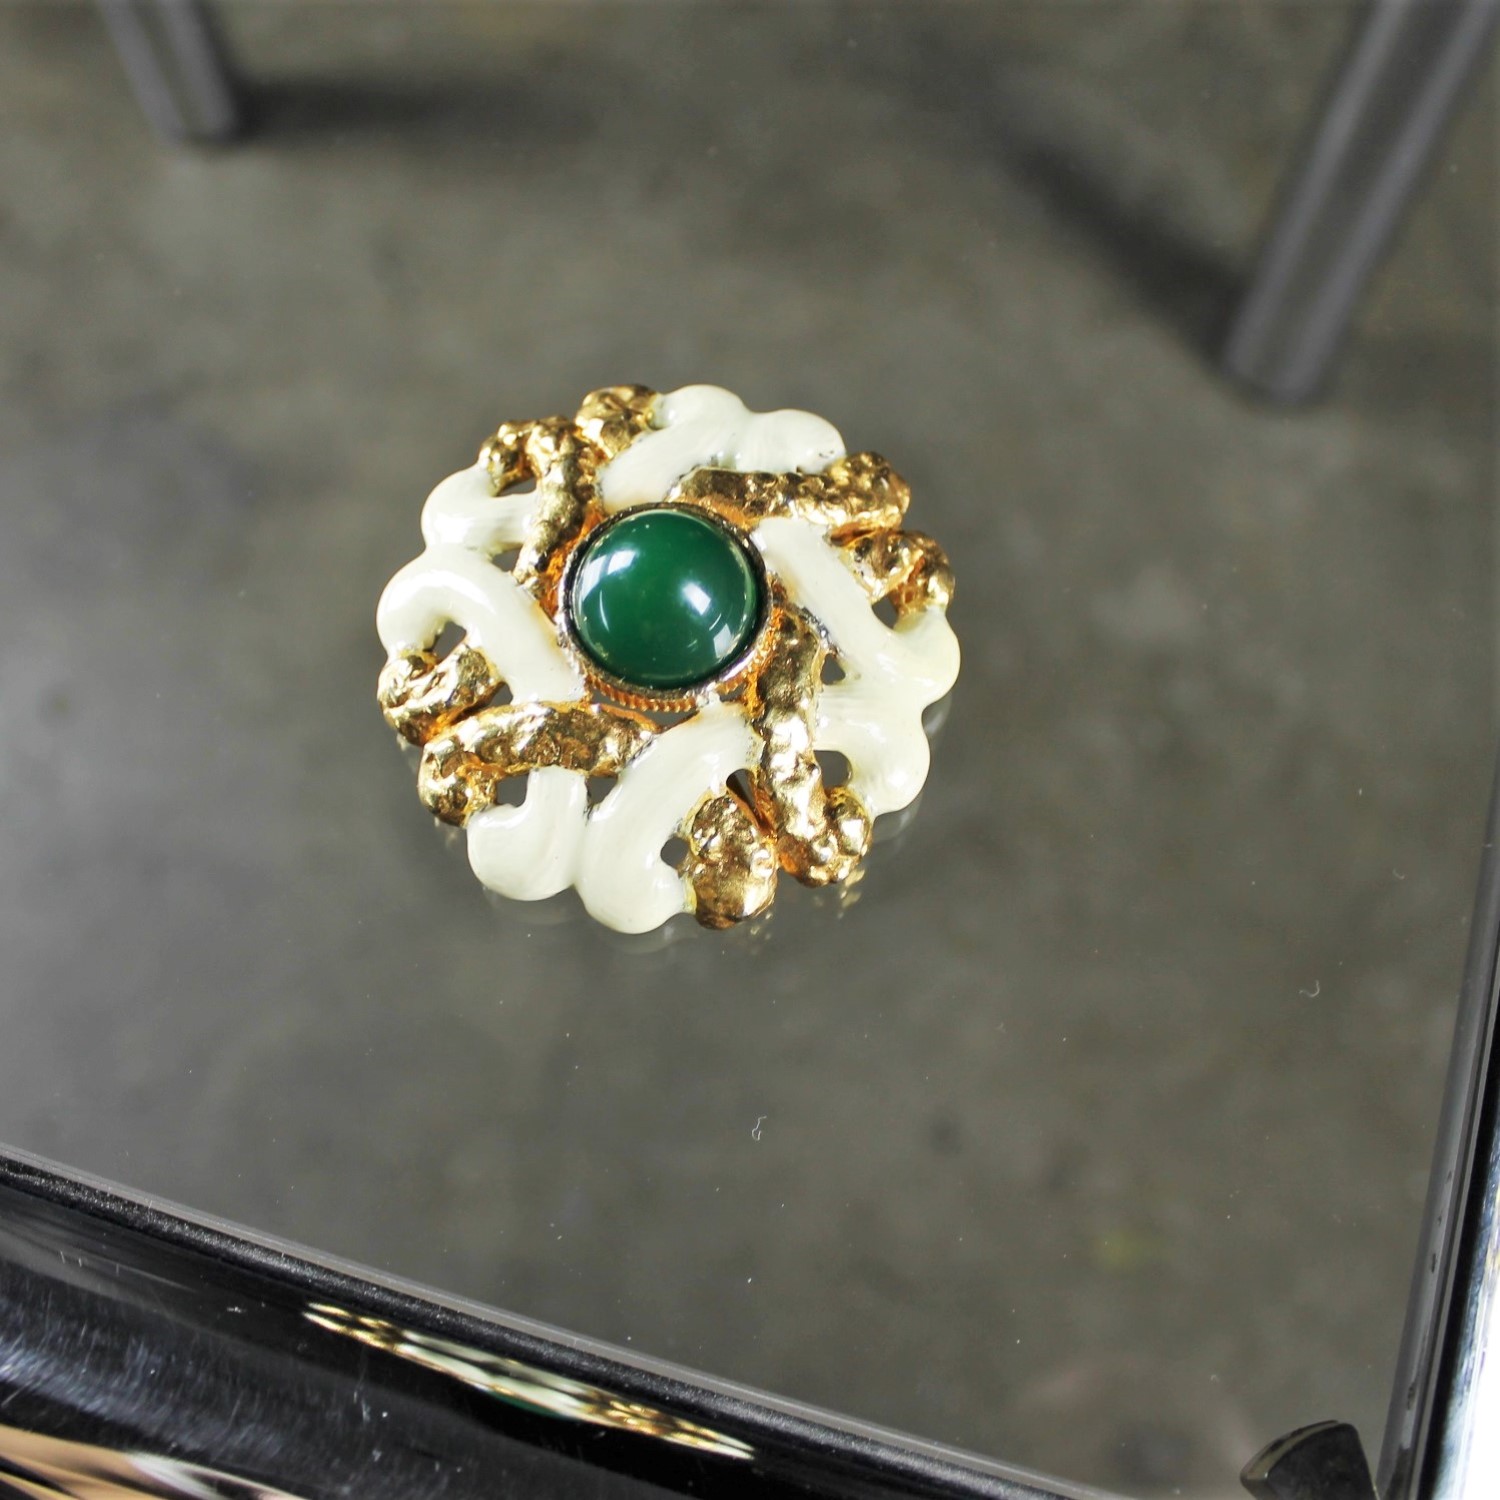 Vintage Black And White Flower Ring by Kenneth Jay Lane at ORCHARD